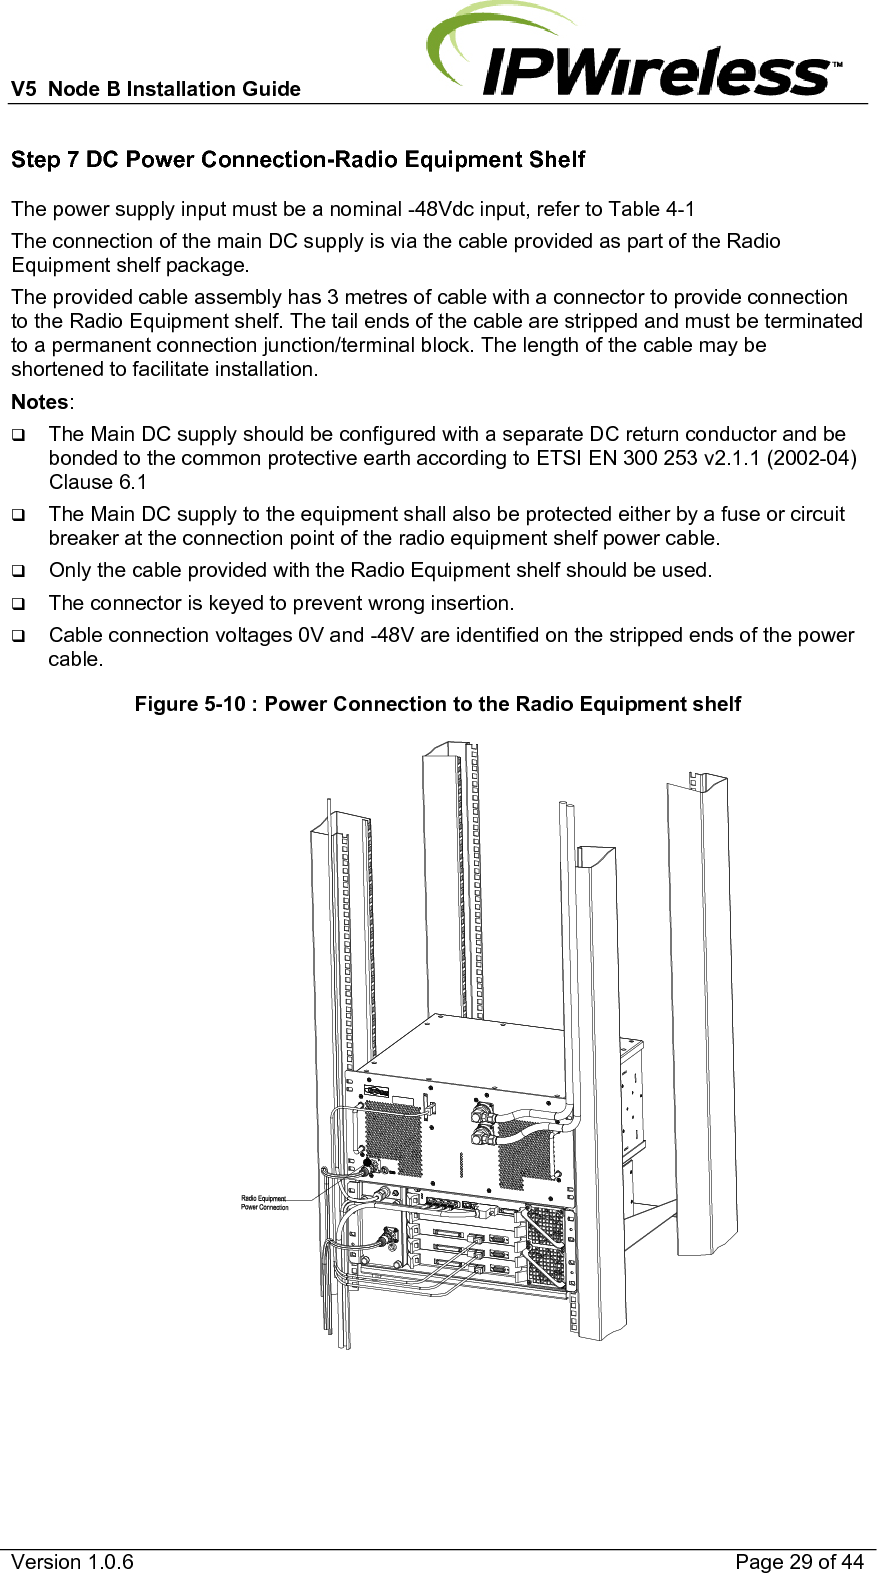 V5  Node B Installation Guide                           Version 1.0.6    Page 29 of 44 Step 7 DC Power Connection-Radio Equipment Shelf The power supply input must be a nominal -48Vdc input, refer to Table 4-1 The connection of the main DC supply is via the cable provided as part of the Radio Equipment shelf package. The provided cable assembly has 3 metres of cable with a connector to provide connection to the Radio Equipment shelf. The tail ends of the cable are stripped and must be terminated to a permanent connection junction/terminal block. The length of the cable may be shortened to facilitate installation. Notes:   The Main DC supply should be configured with a separate DC return conductor and be bonded to the common protective earth according to ETSI EN 300 253 v2.1.1 (2002-04) Clause 6.1  The Main DC supply to the equipment shall also be protected either by a fuse or circuit breaker at the connection point of the radio equipment shelf power cable.  Only the cable provided with the Radio Equipment shelf should be used.  The connector is keyed to prevent wrong insertion.  Cable connection voltages 0V and -48V are identified on the stripped ends of the power cable. Figure 5-10 : Power Connection to the Radio Equipment shelf                                                                   